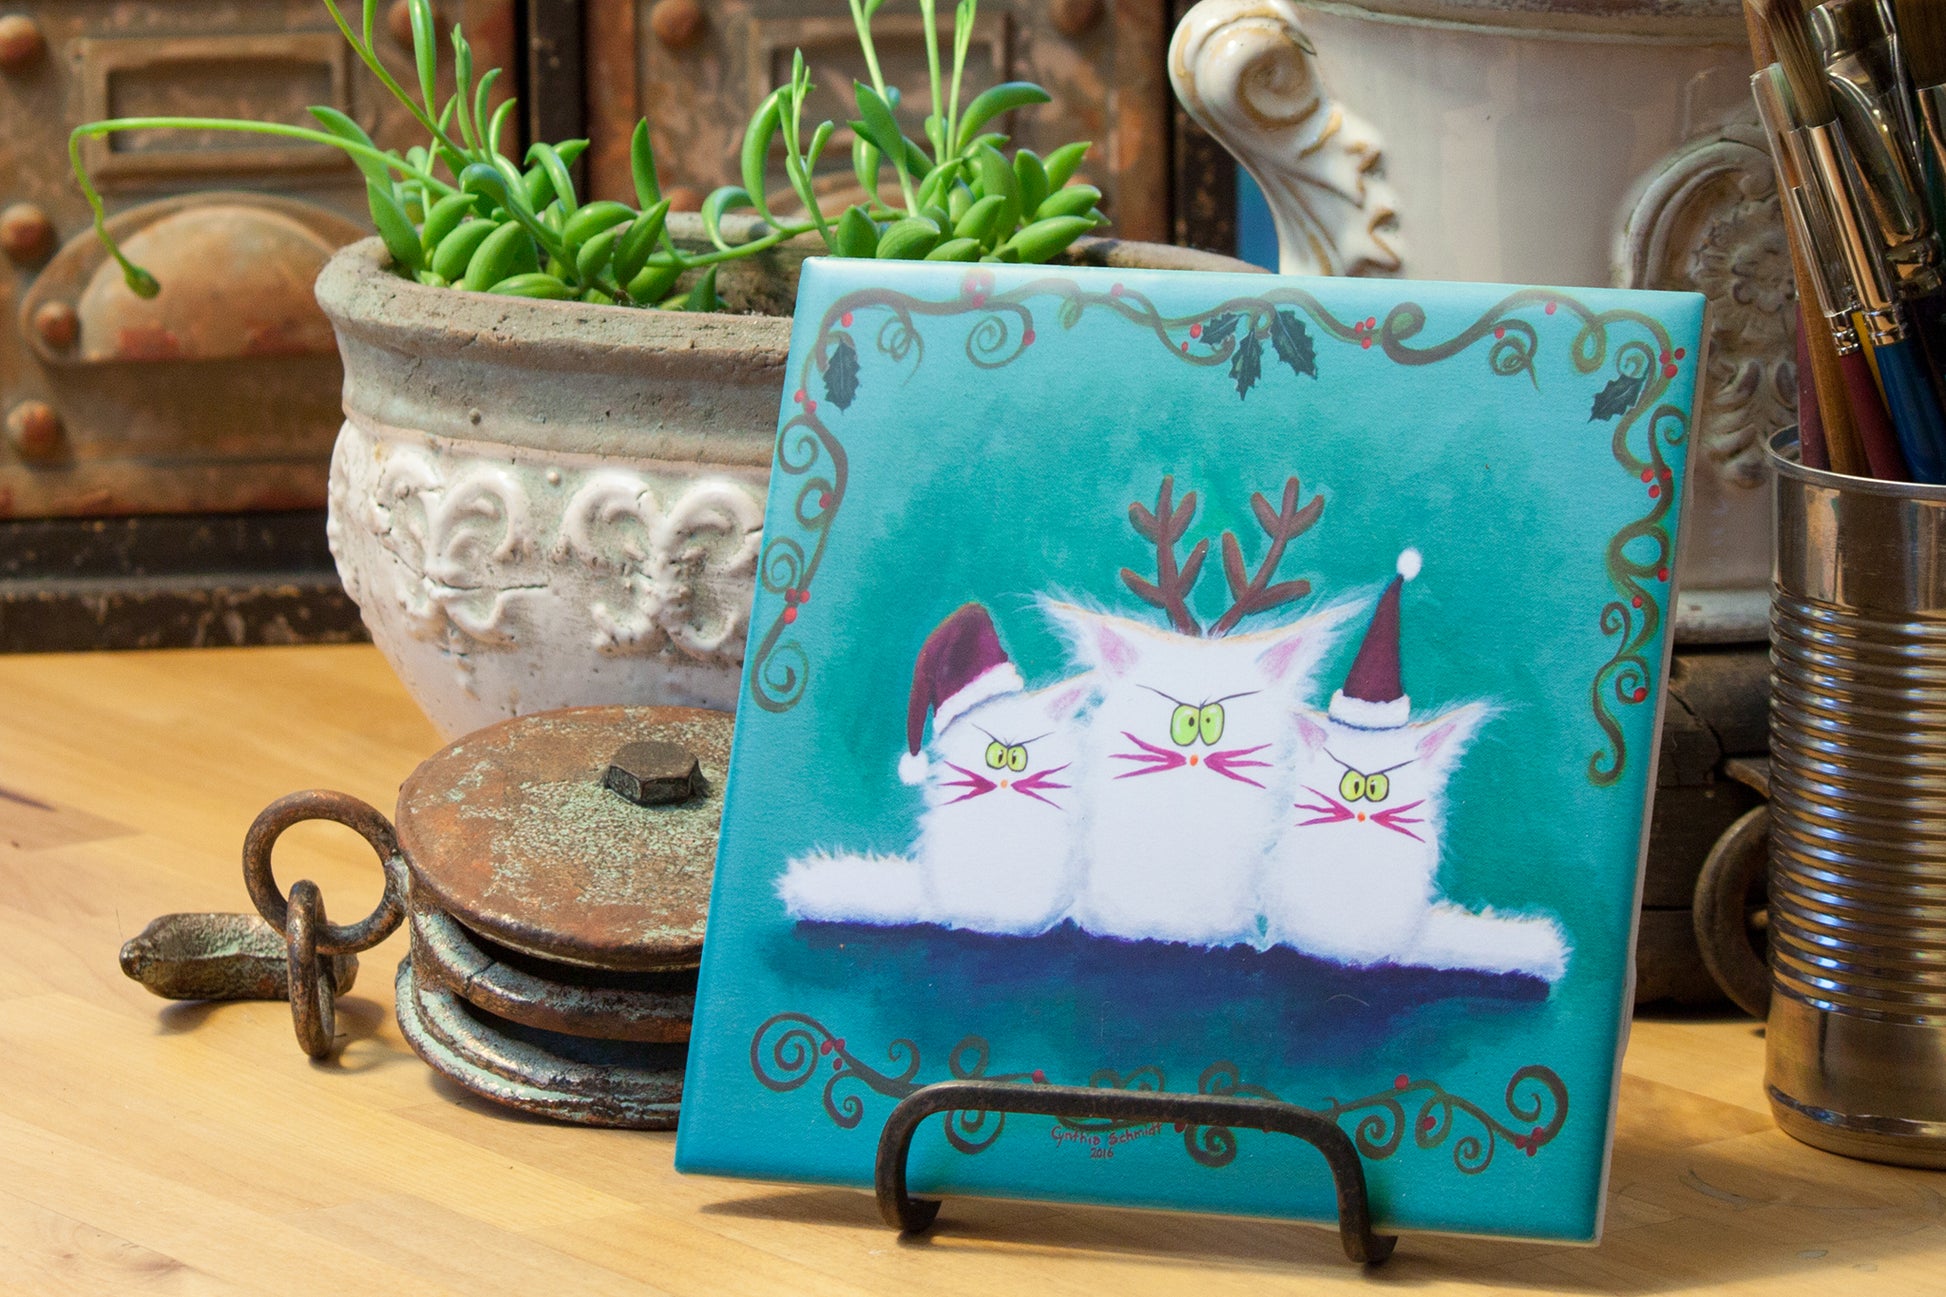 Three White Christmas Kitties - Ceramic Tile - Cranky Cat Collection™ by Cindy Schmidt